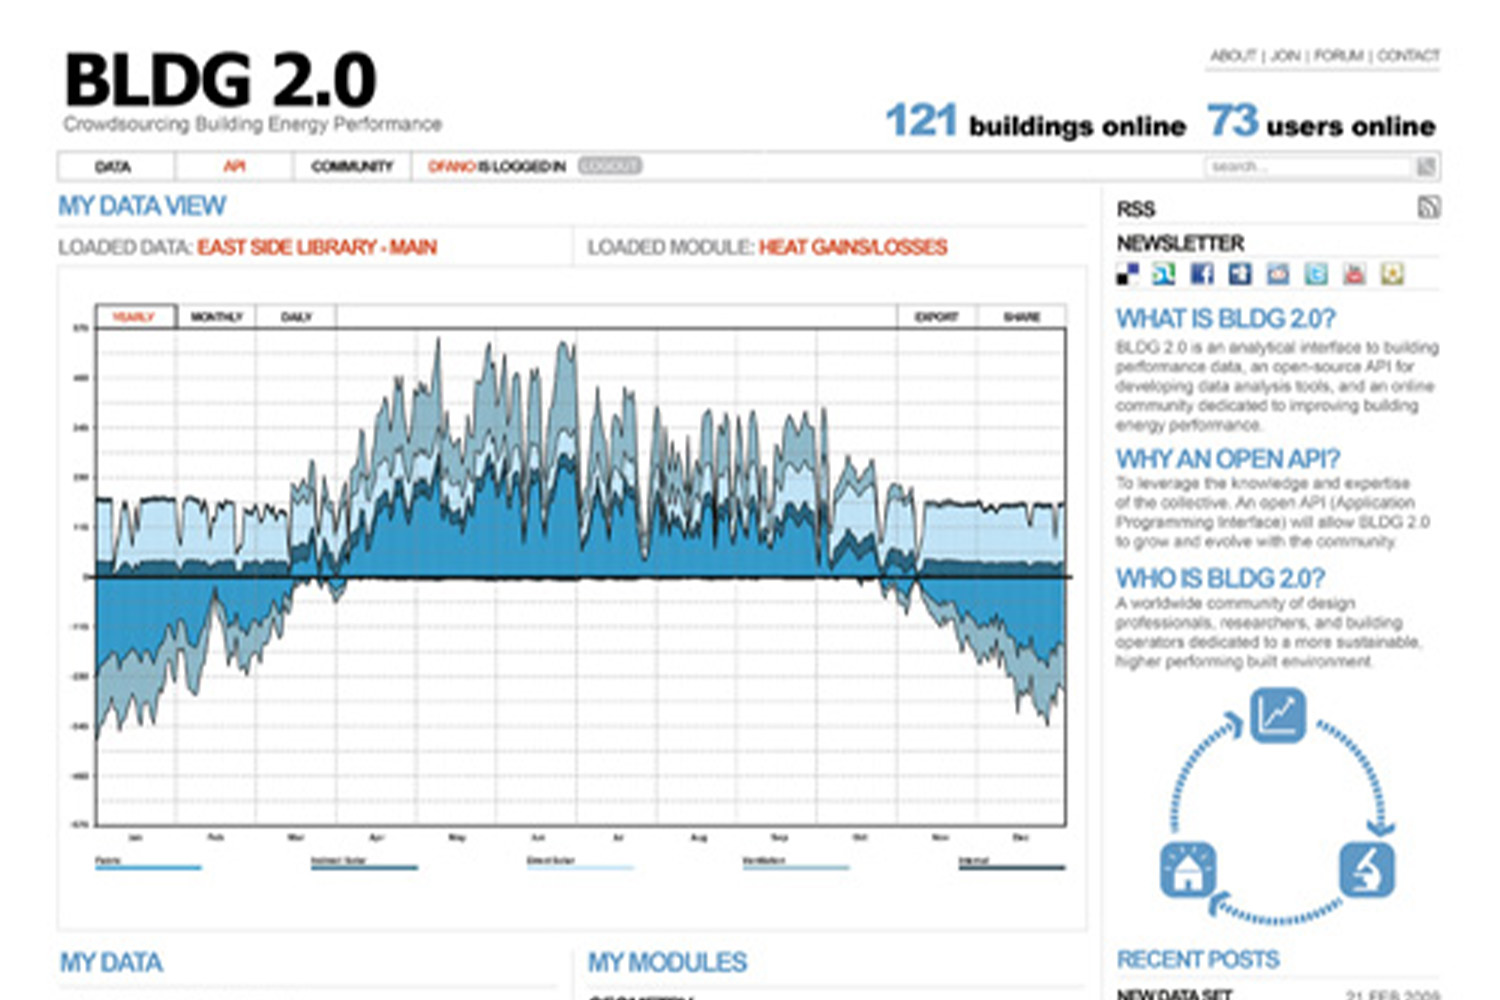 Building Performance Database of BLDG 2.0 project 